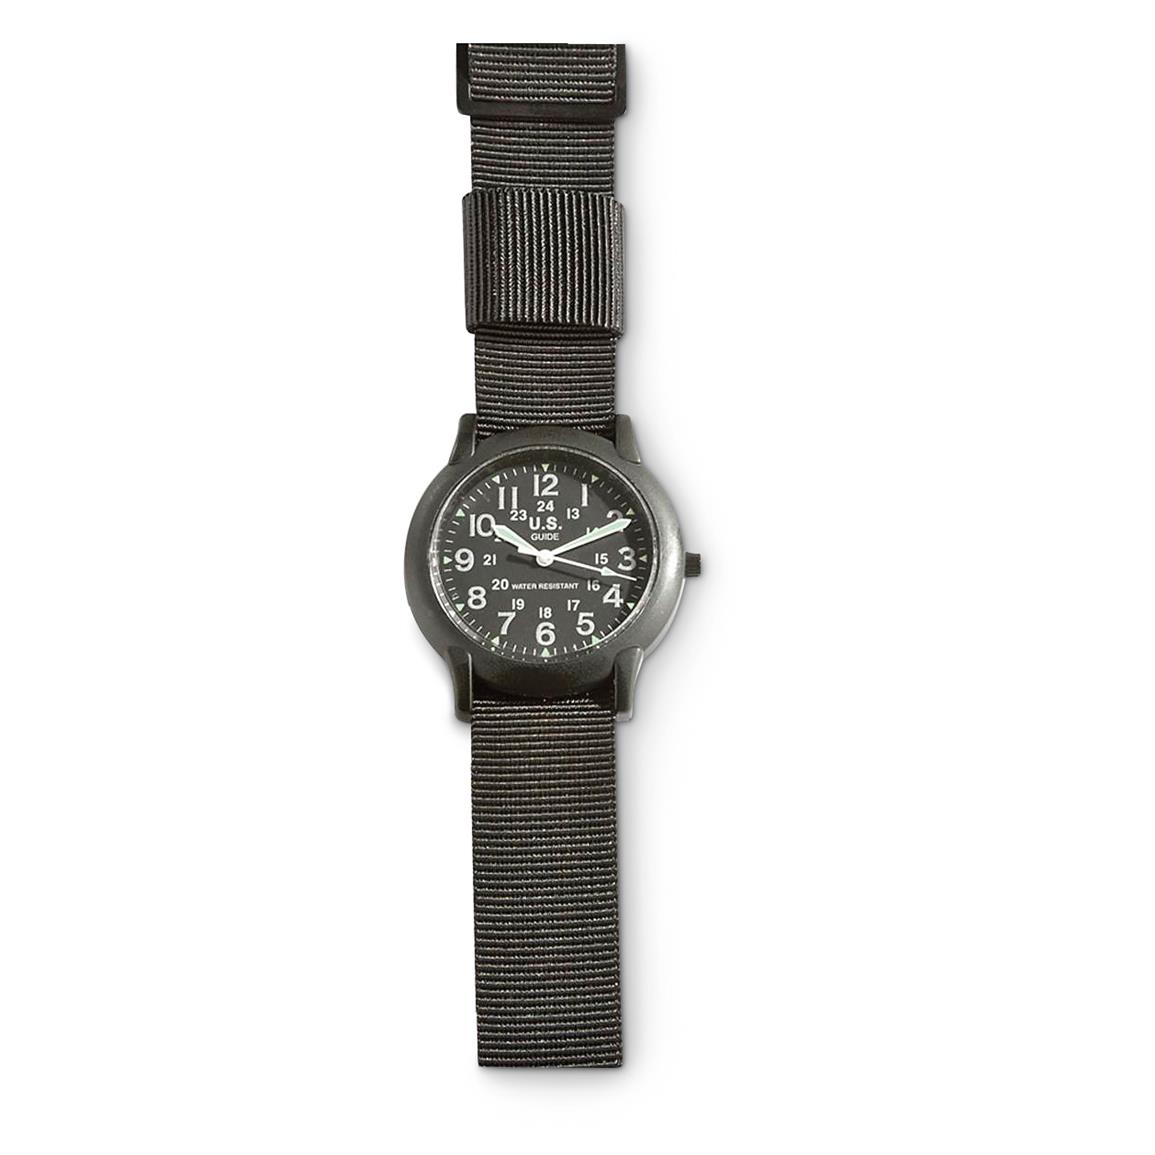 Military-Style Army Watch, Black